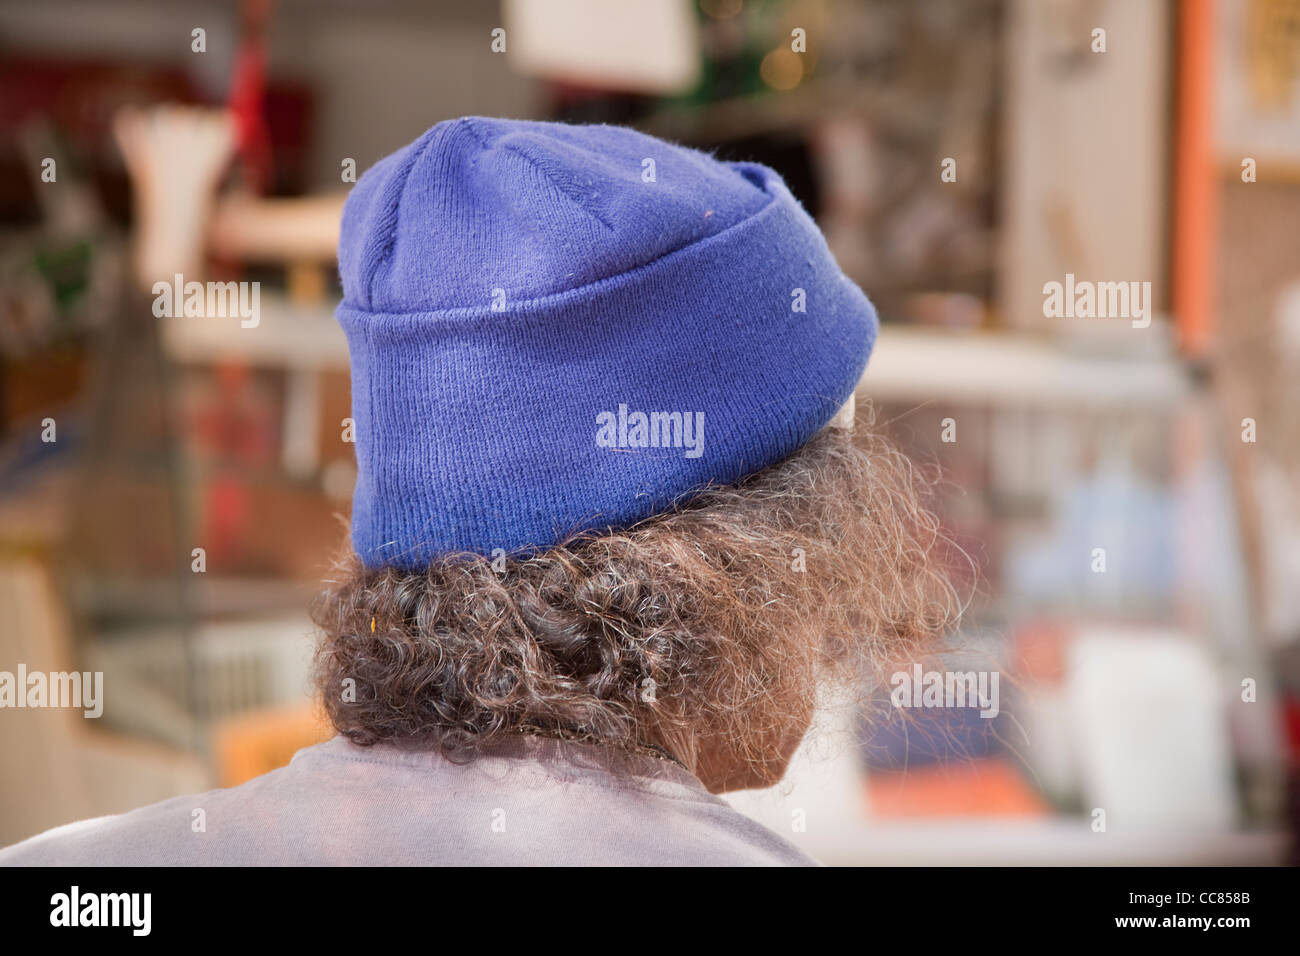 Man with blue wool pull-on hat and straggly unkempt hair Stock Photo